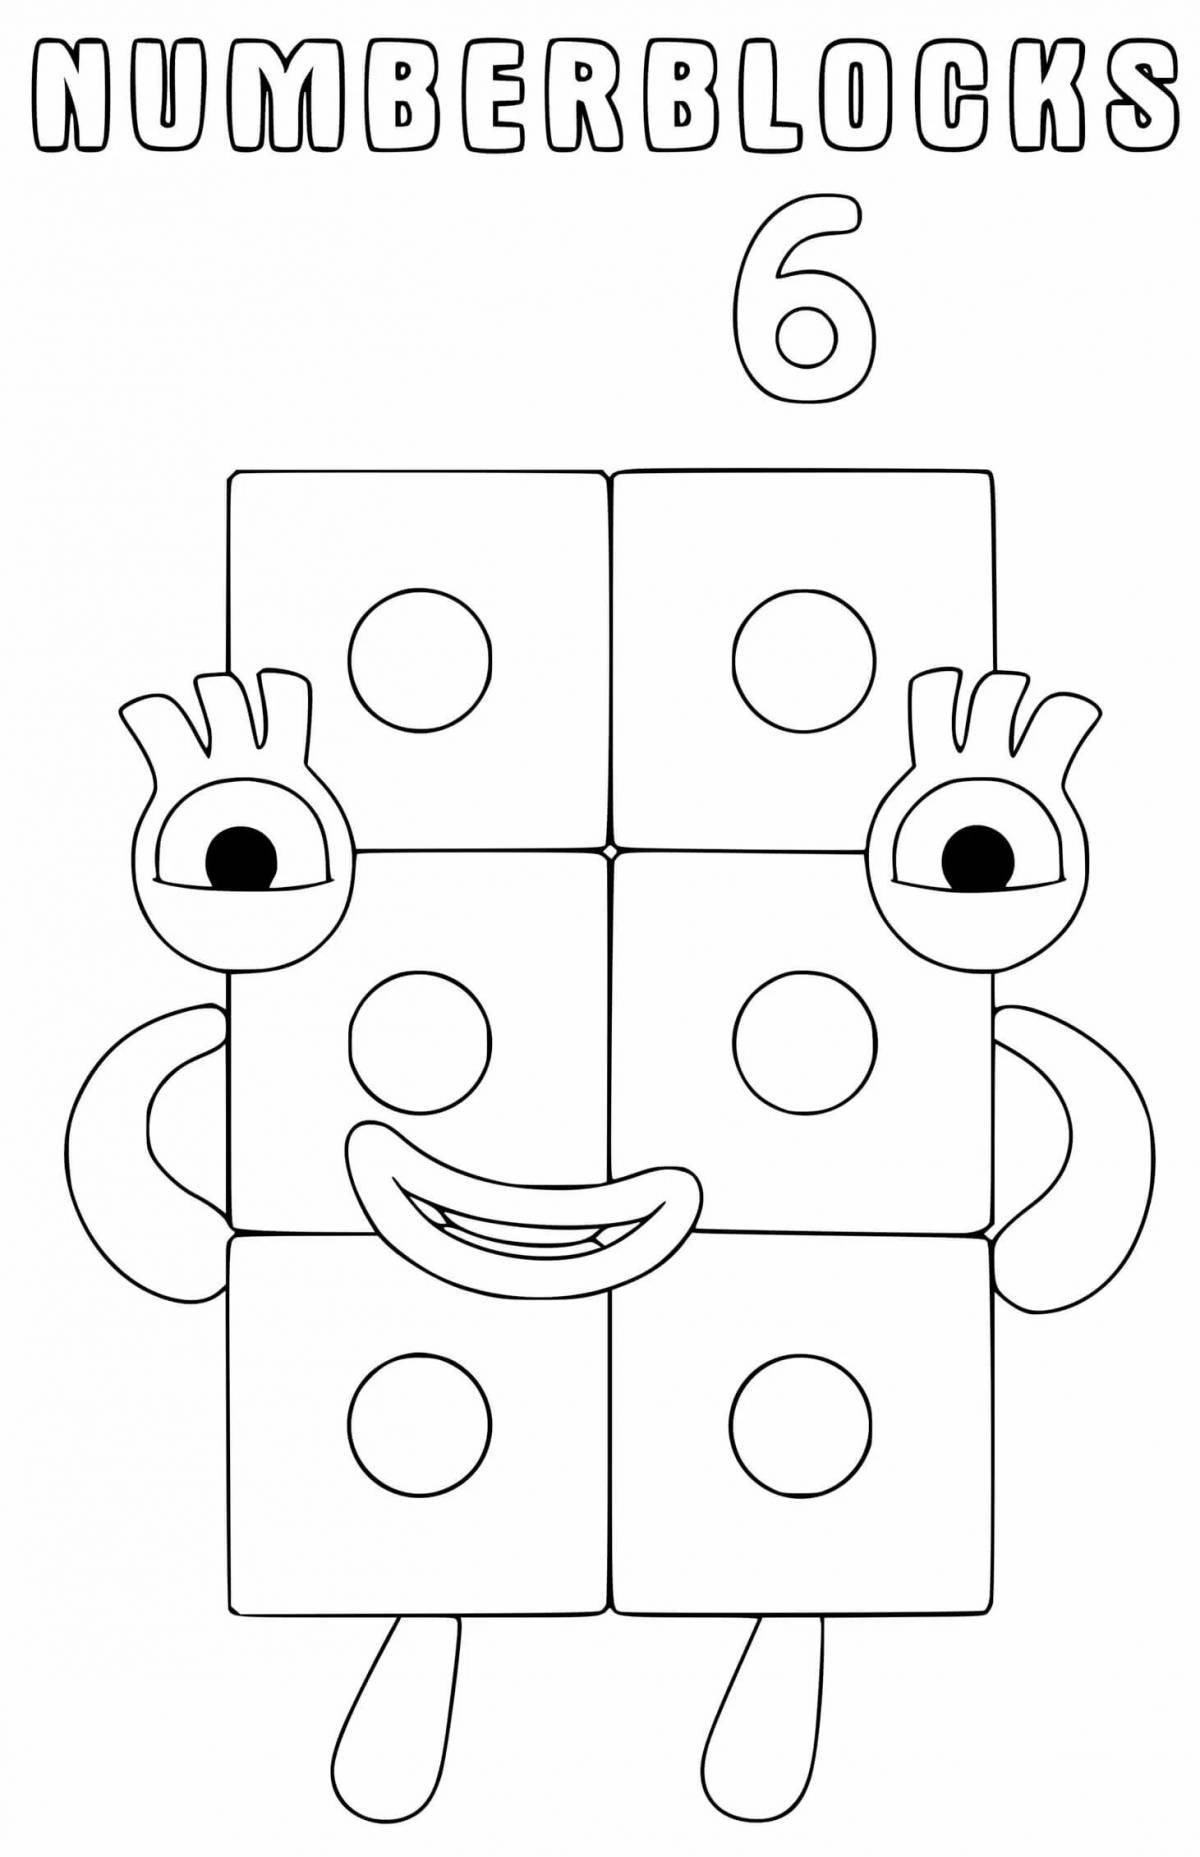 Coloring page with number blocks